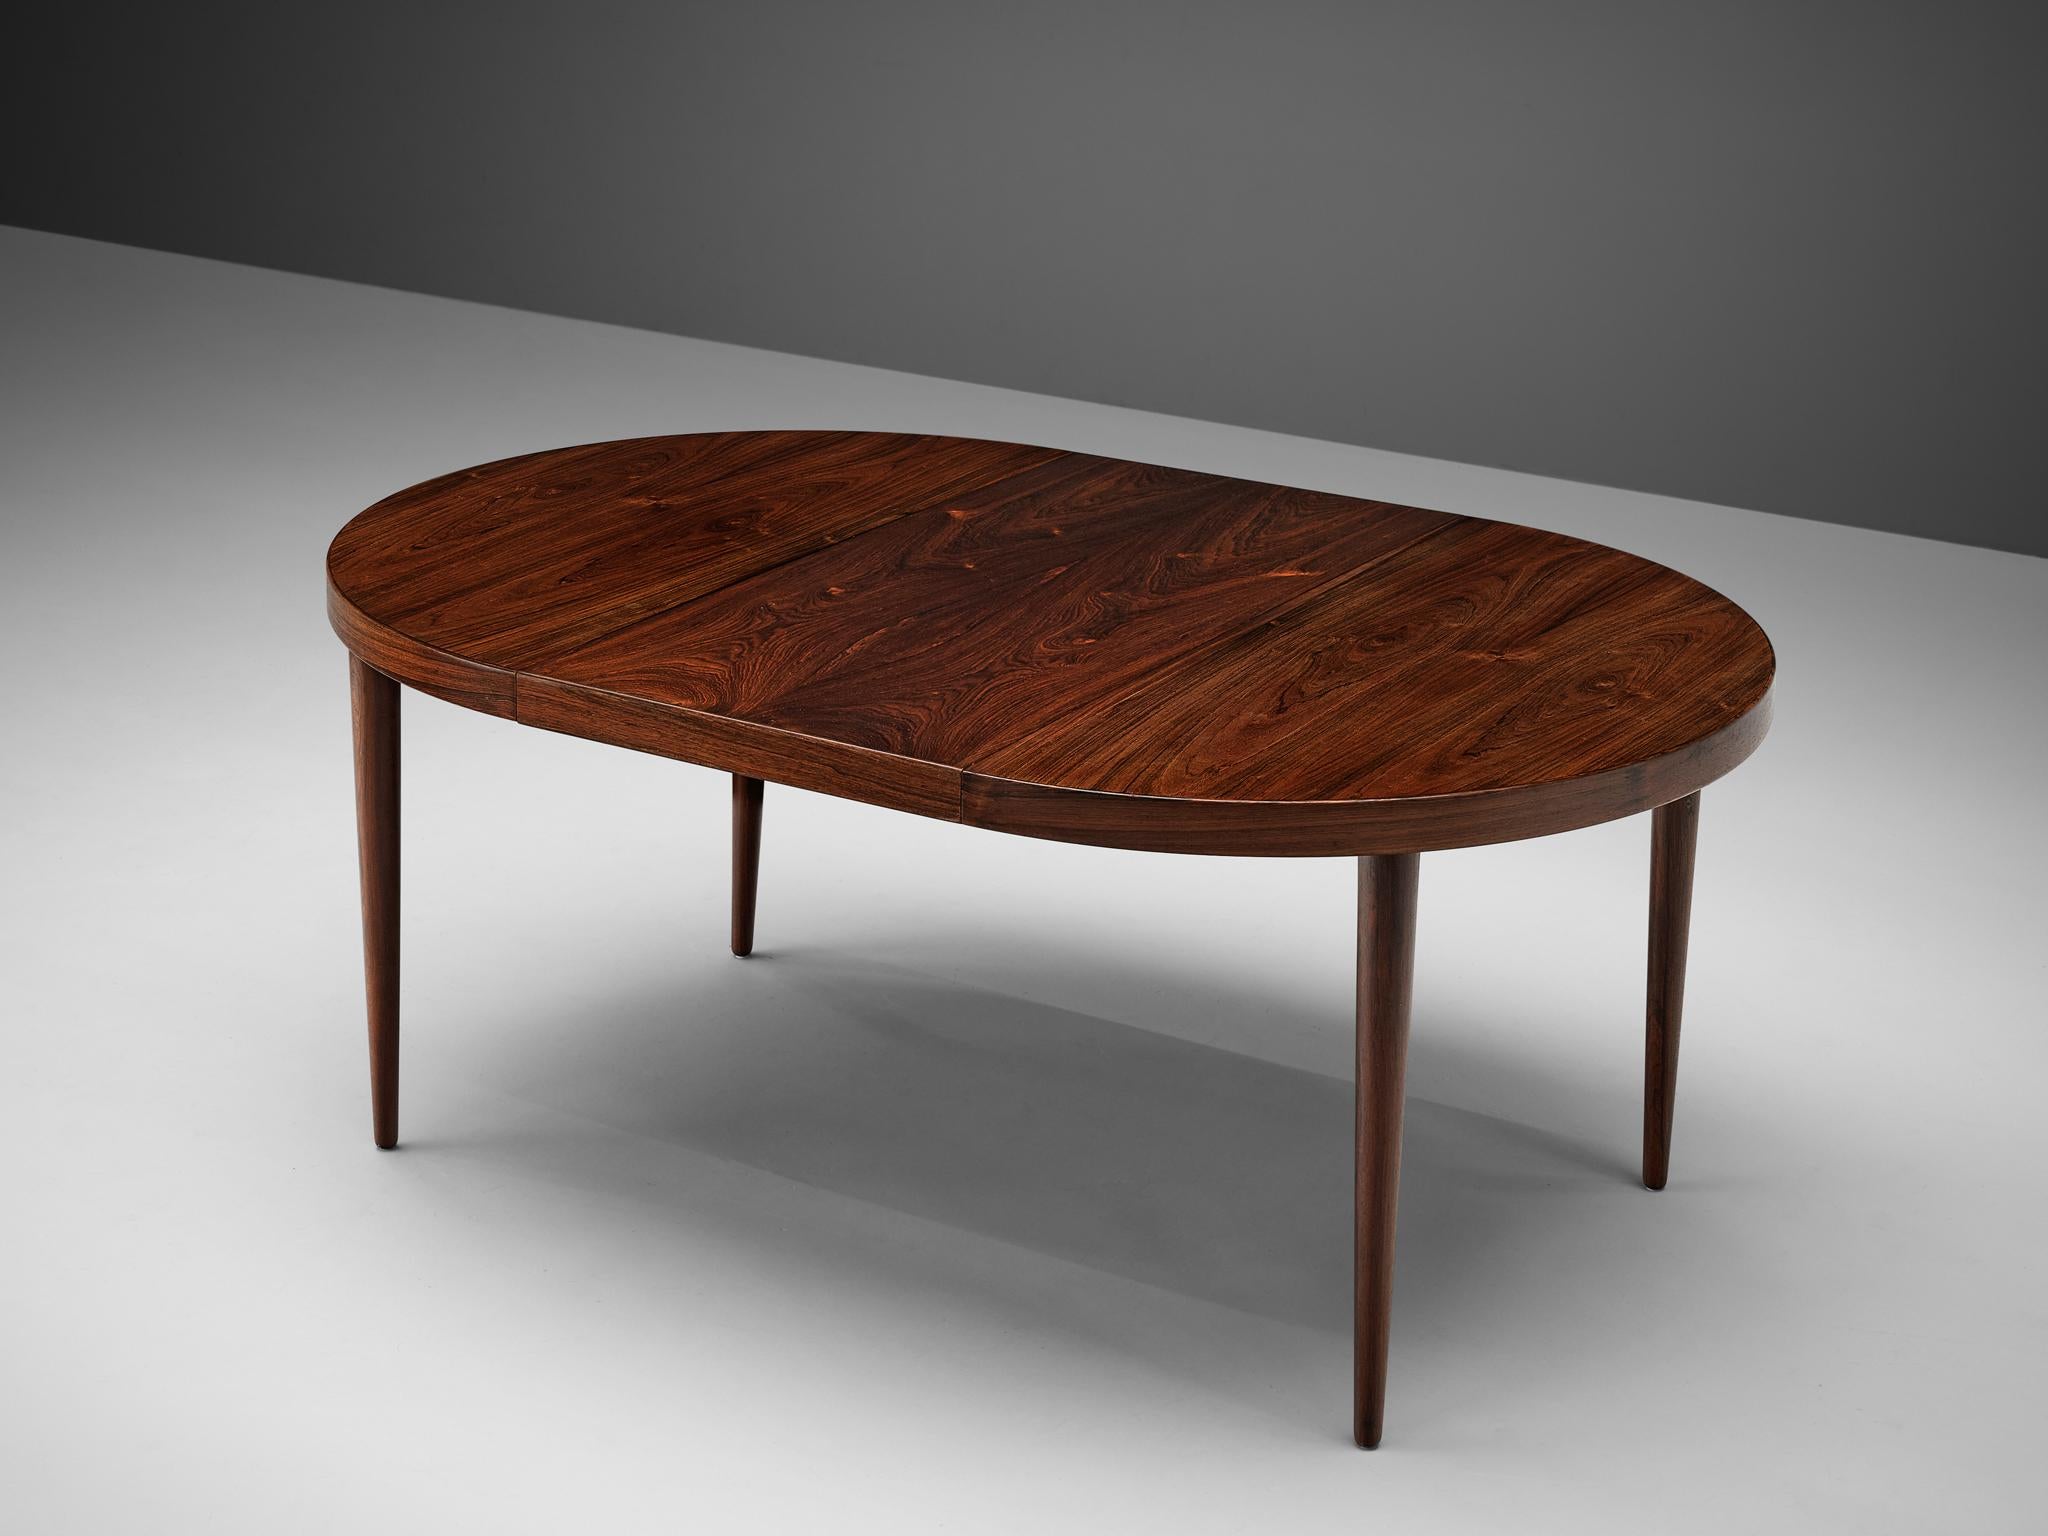 Extendable dining table, rosewood, wood, Denmark, 1950s

This round dining table features a leaf to extend its seize. Therefore, the table is adjusting to different situations. The rosewood tabletop shows striking grain that adds a natural tough to